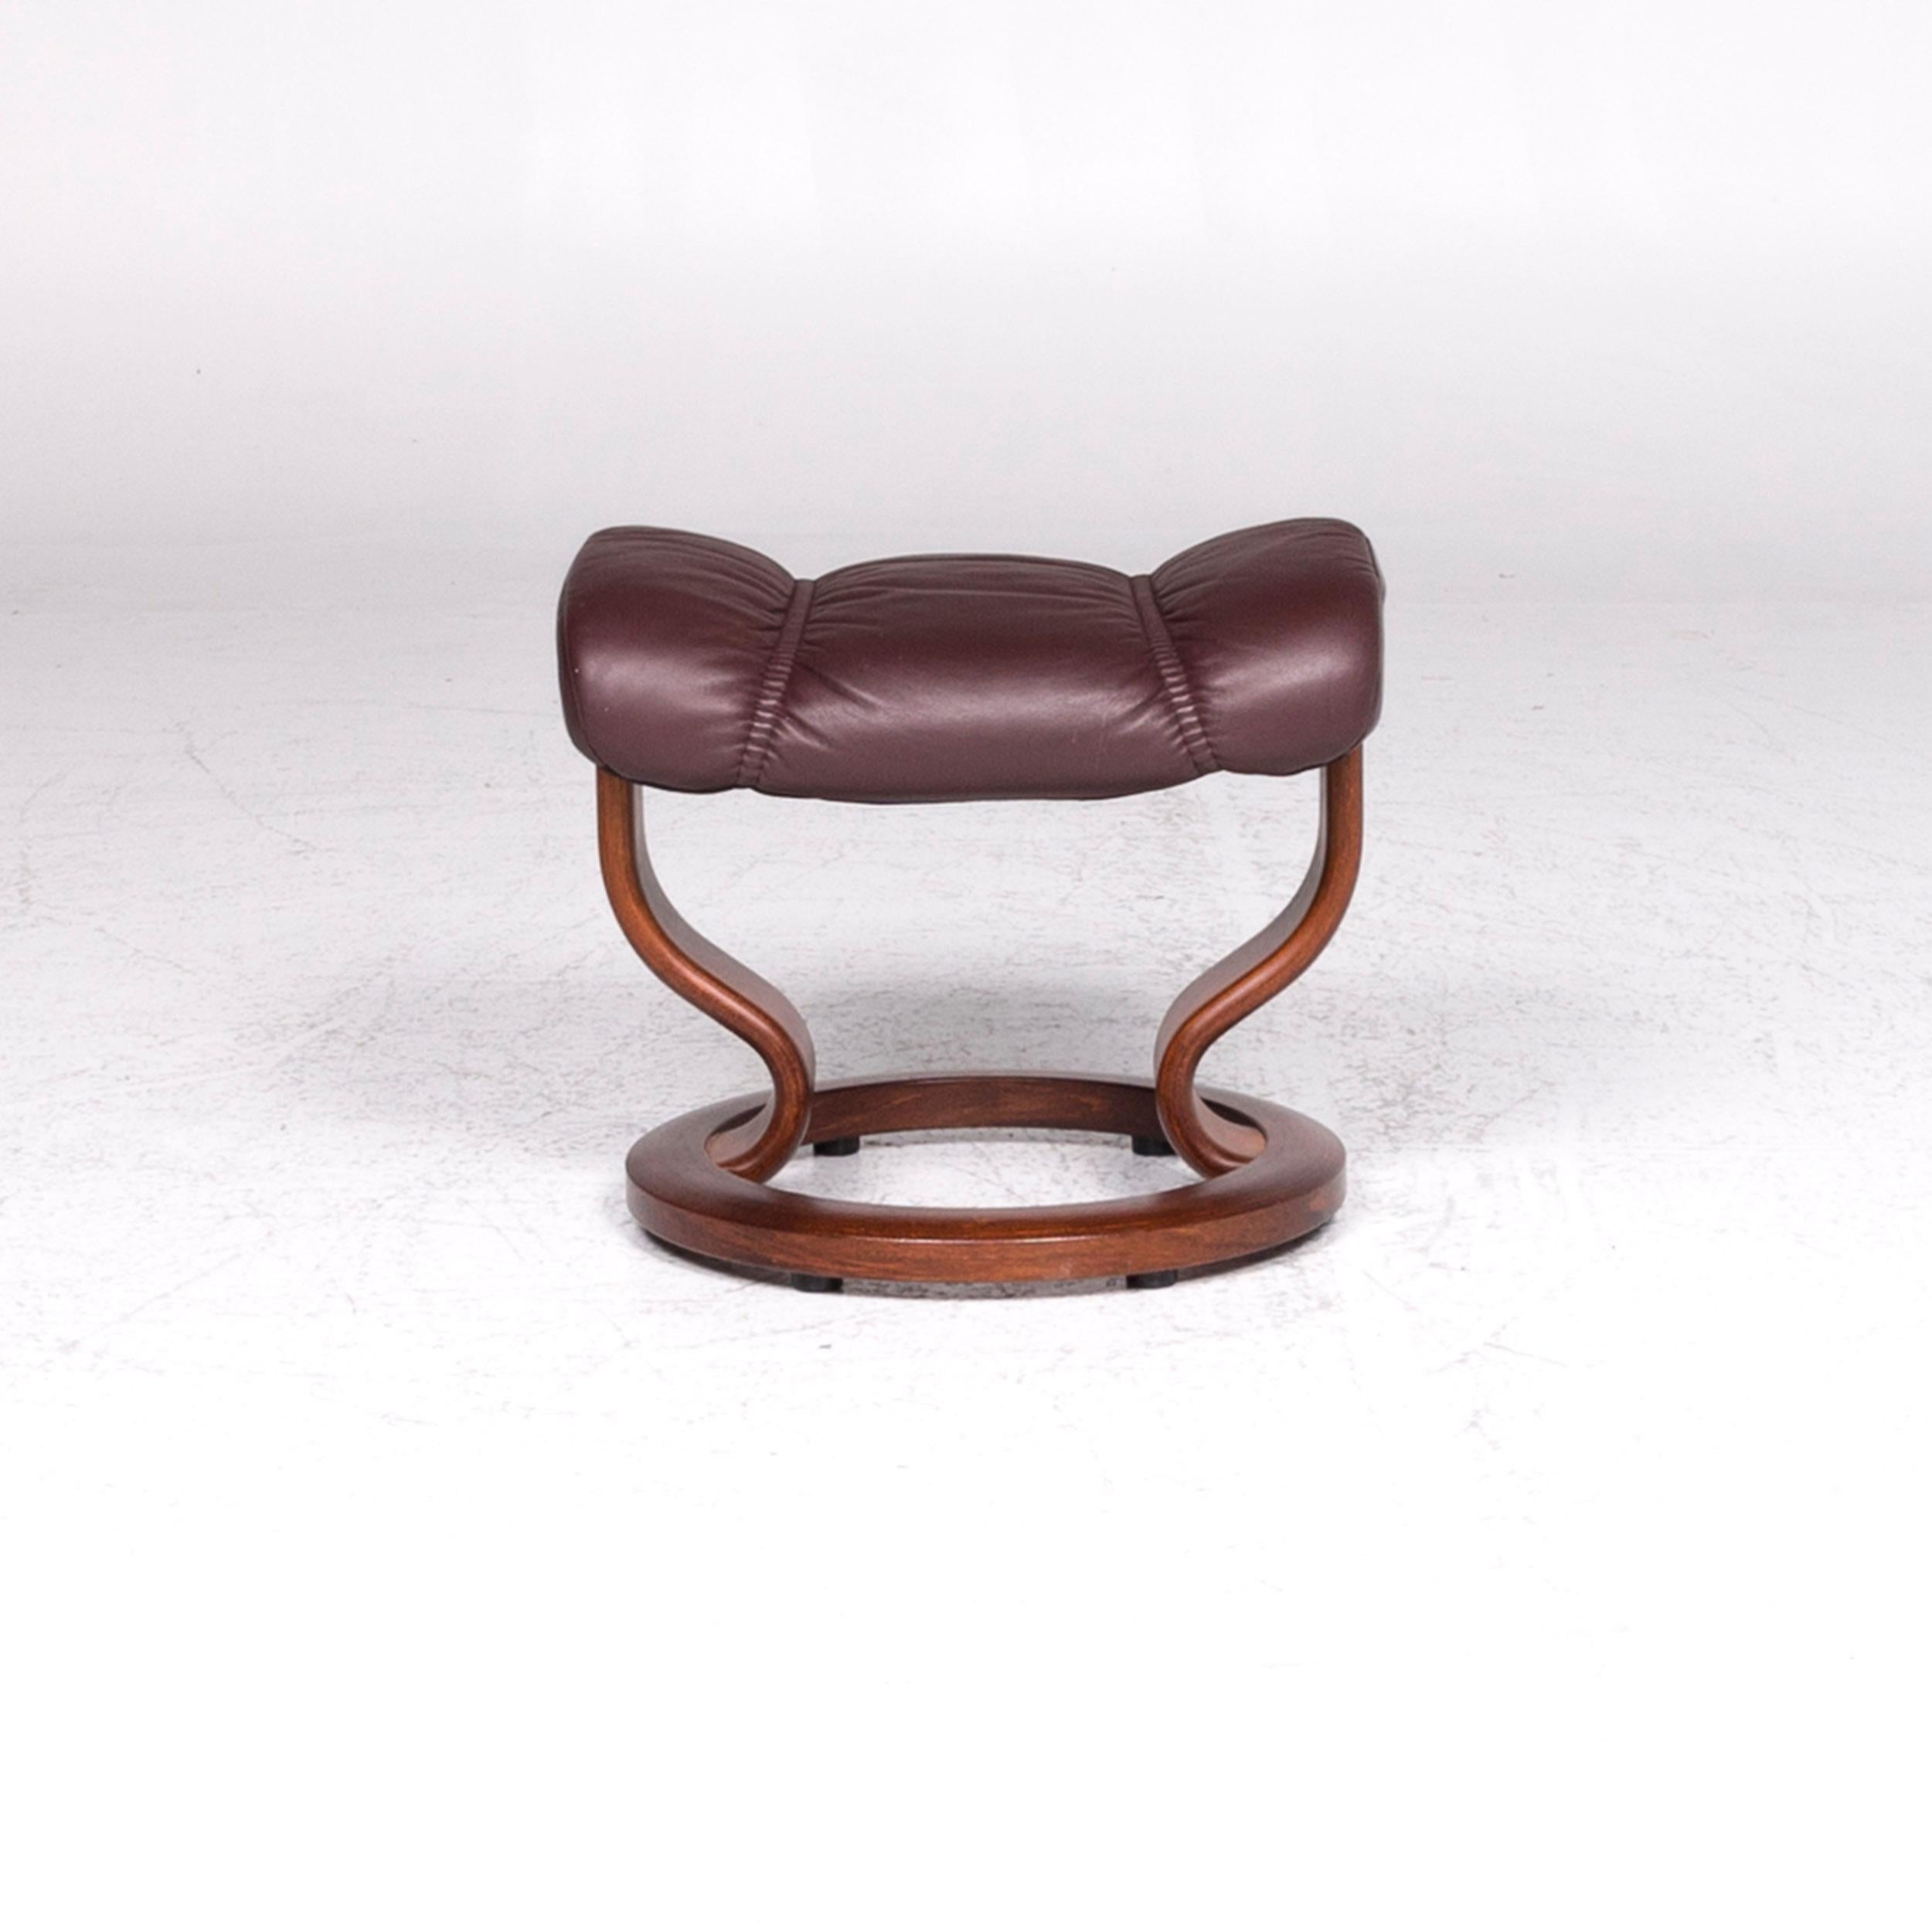 Stressless Consul Leather Armchair Stool Red-Brown Relax Function 11